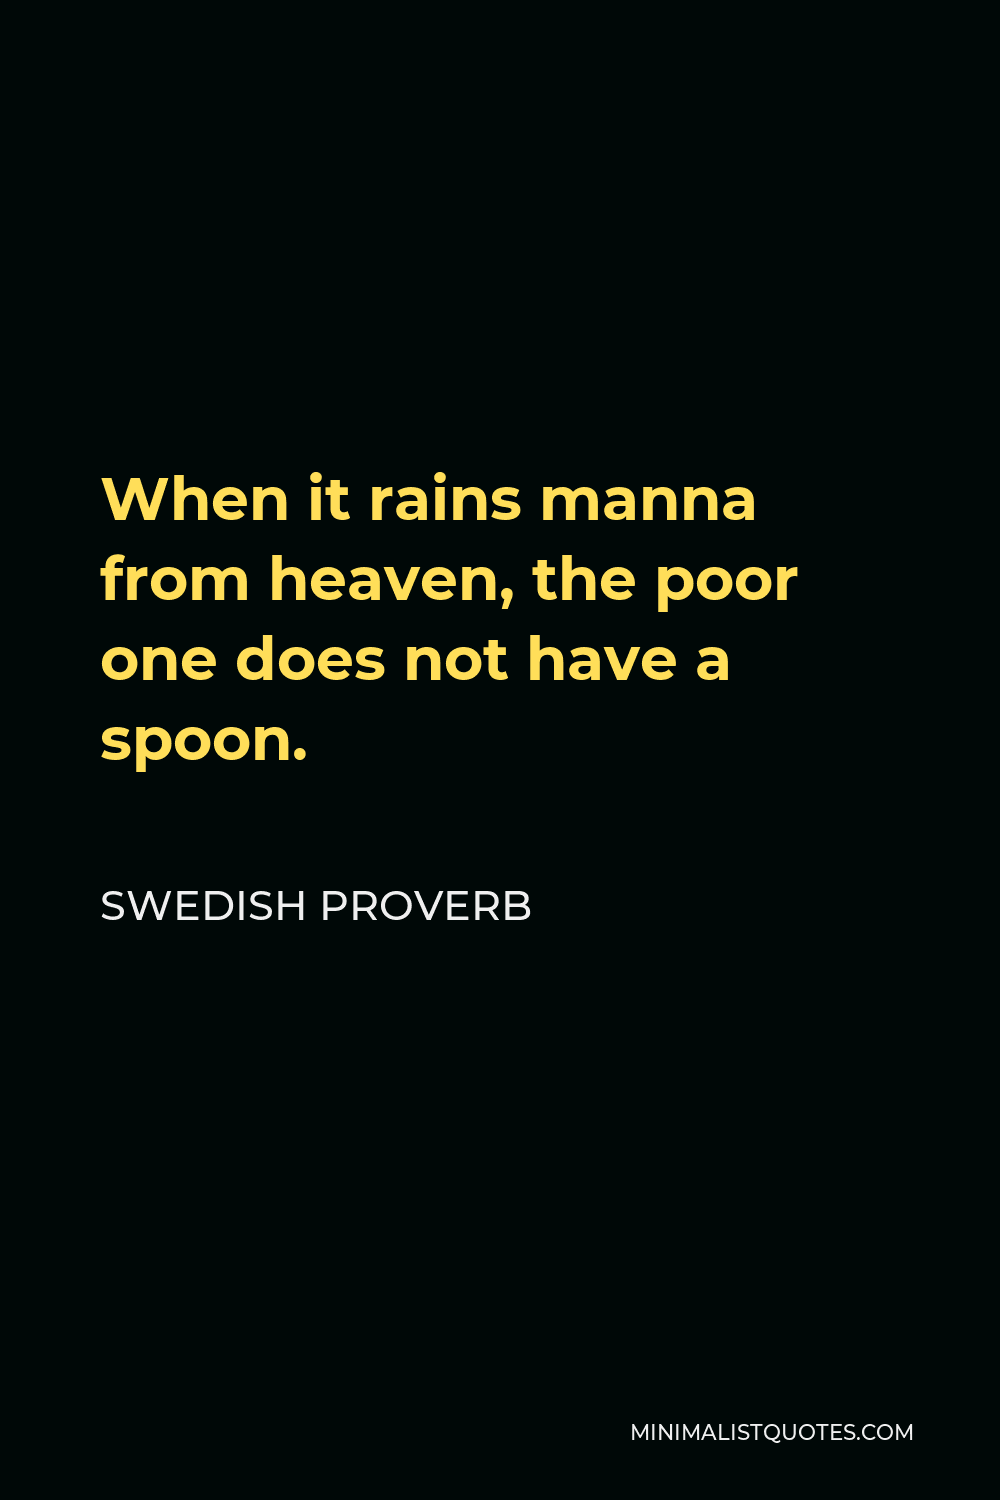 Swedish Proverb Quote - When it rains manna from heaven, the poor one does not have a spoon.